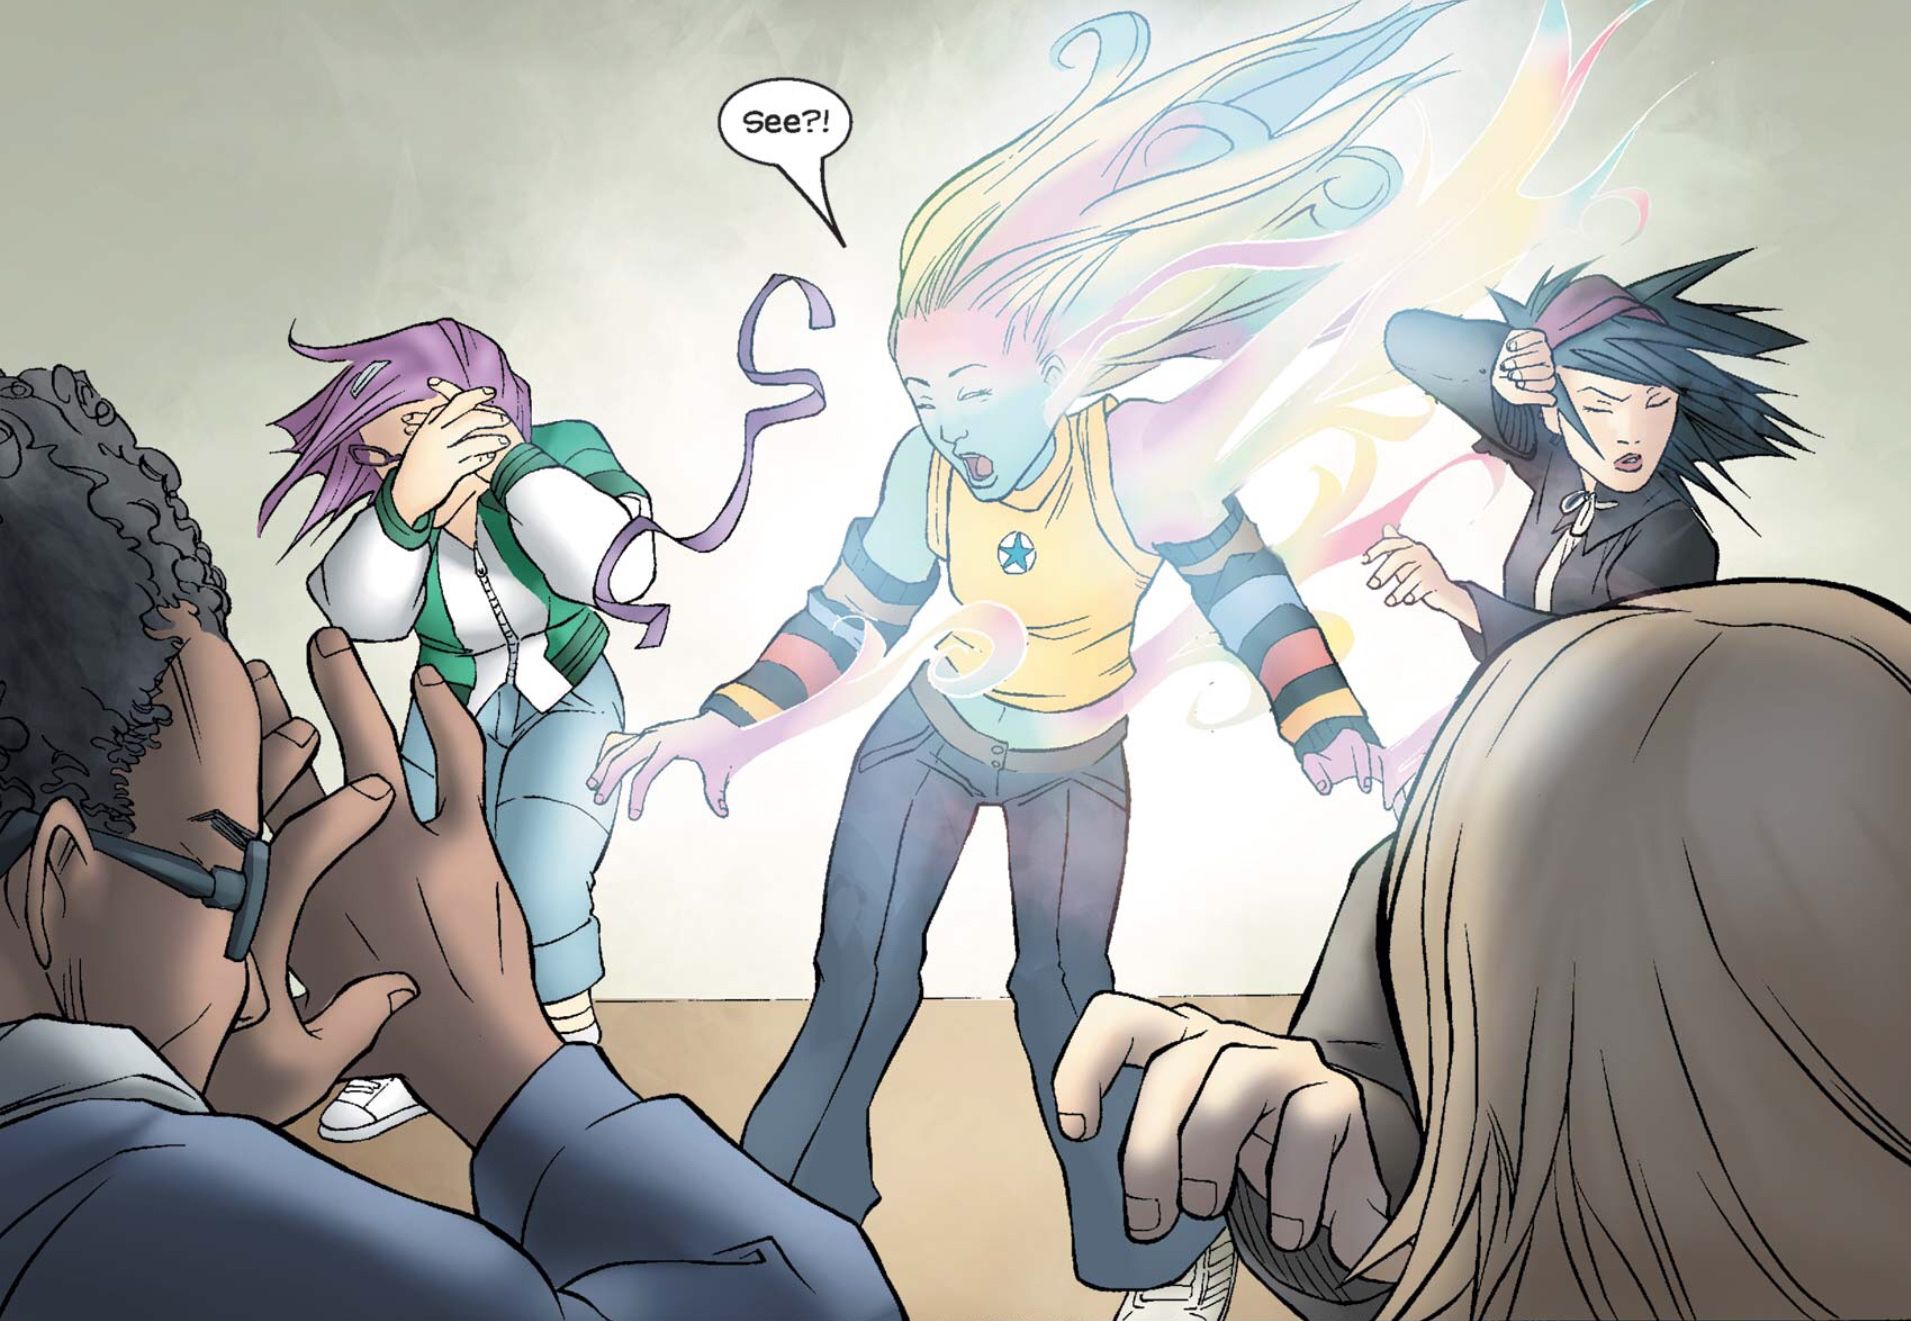 Karolina's body changes to its alien form—bright and shimmering pastels—as her teammates cover their eyes